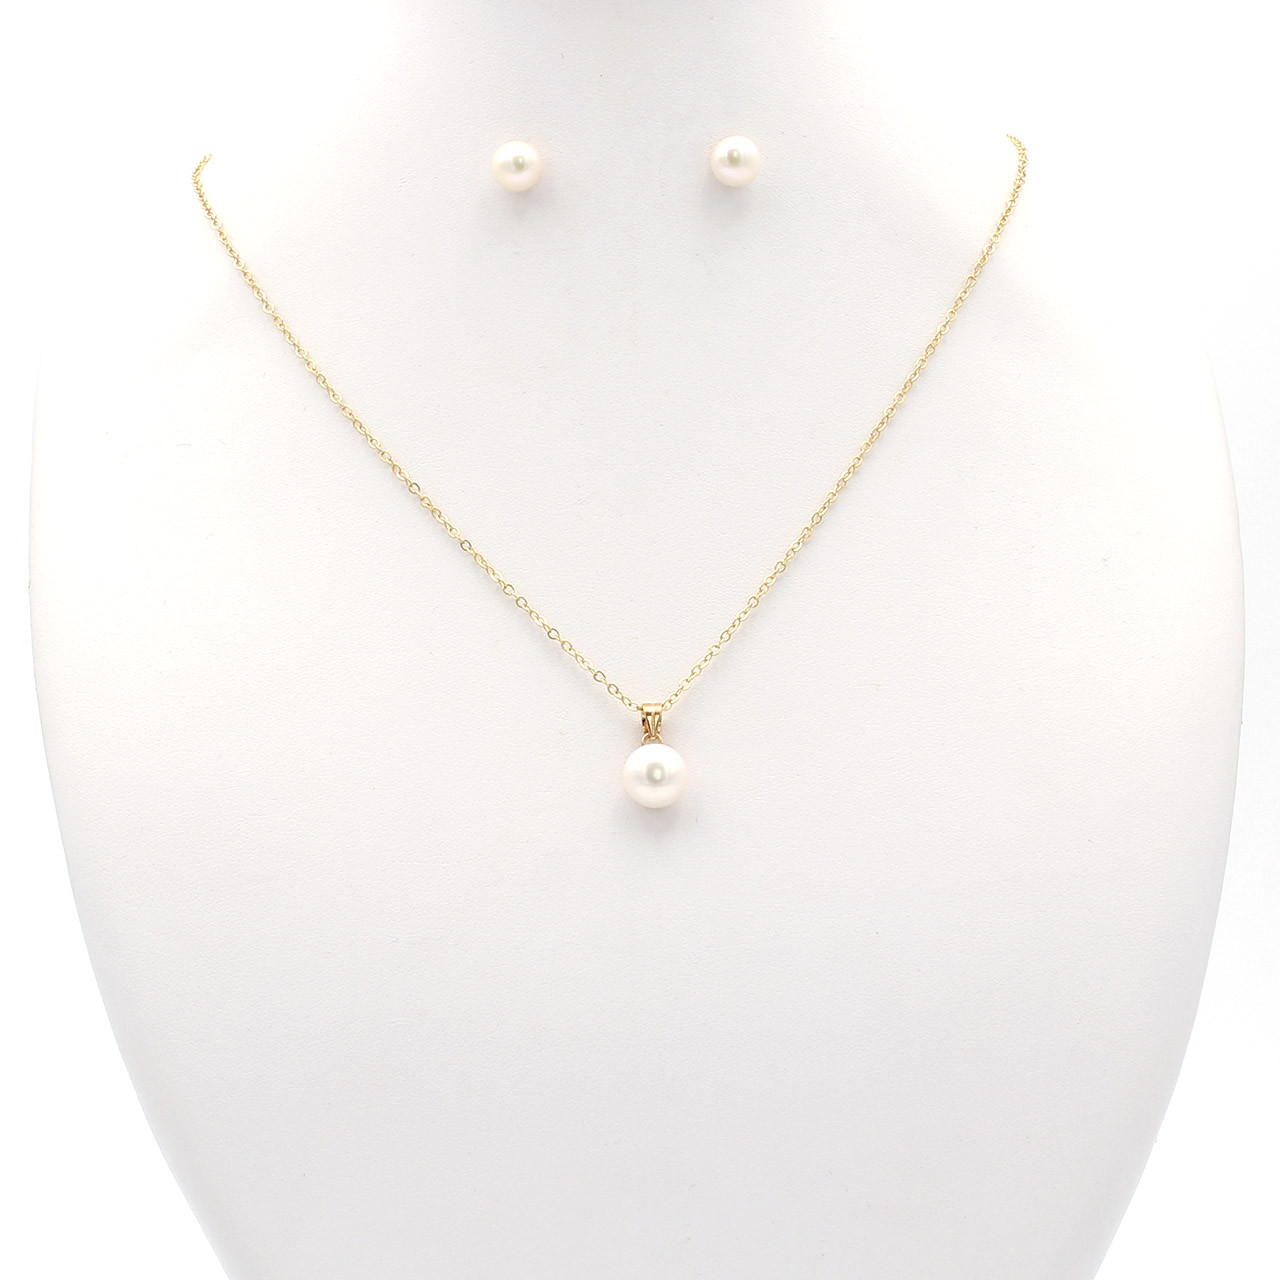 RELEASED FROM LOVE - Cast Freshwater Pearl Necklace – Gillia Clothing